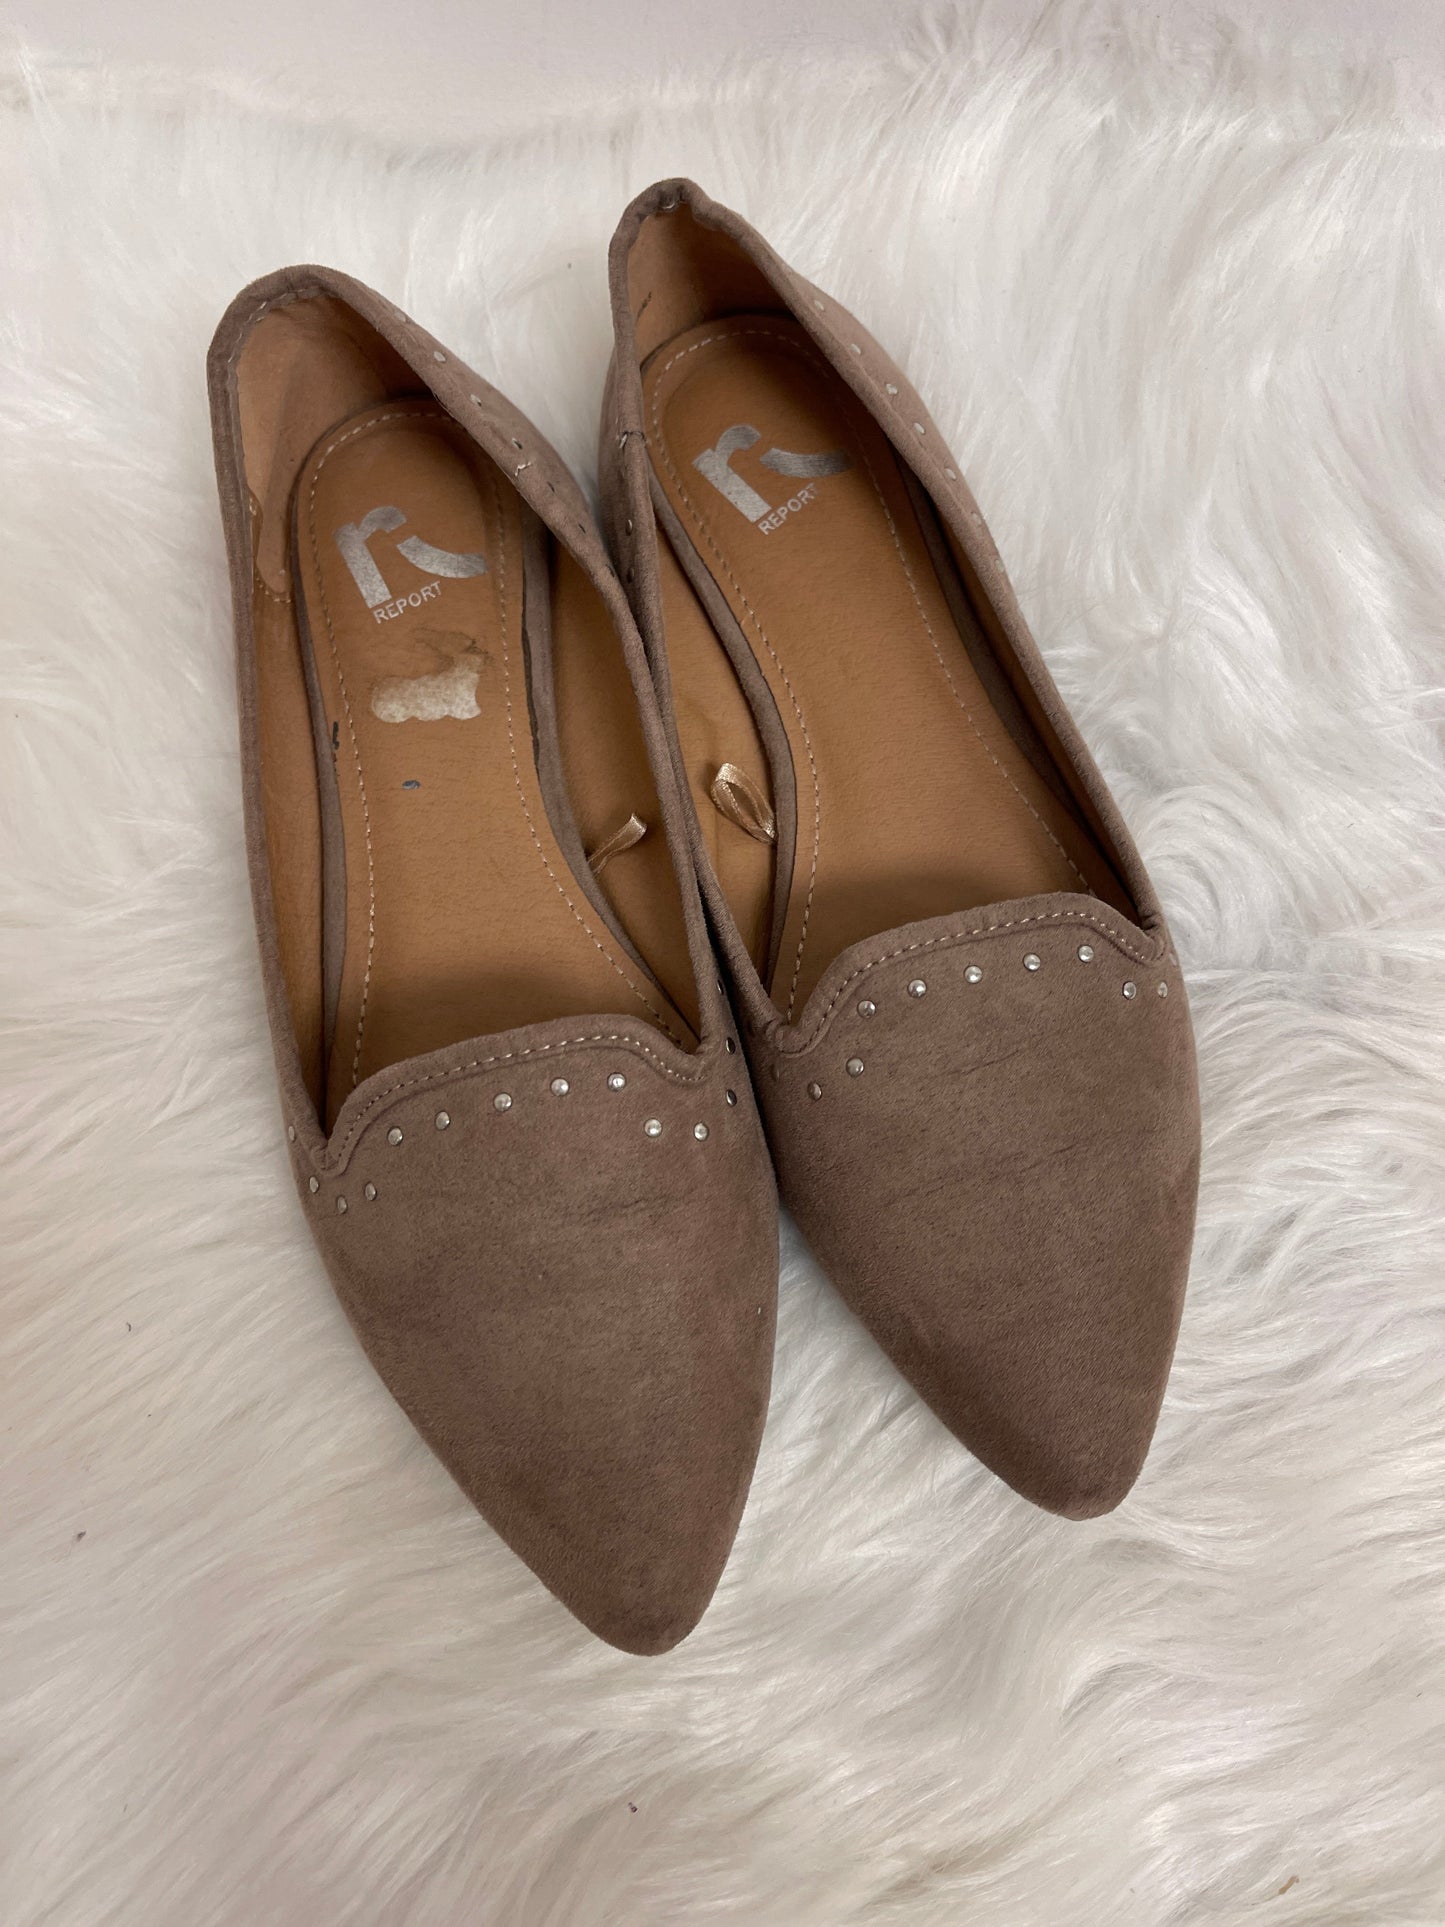 Taupe Shoes Flats Report, Size 7.5